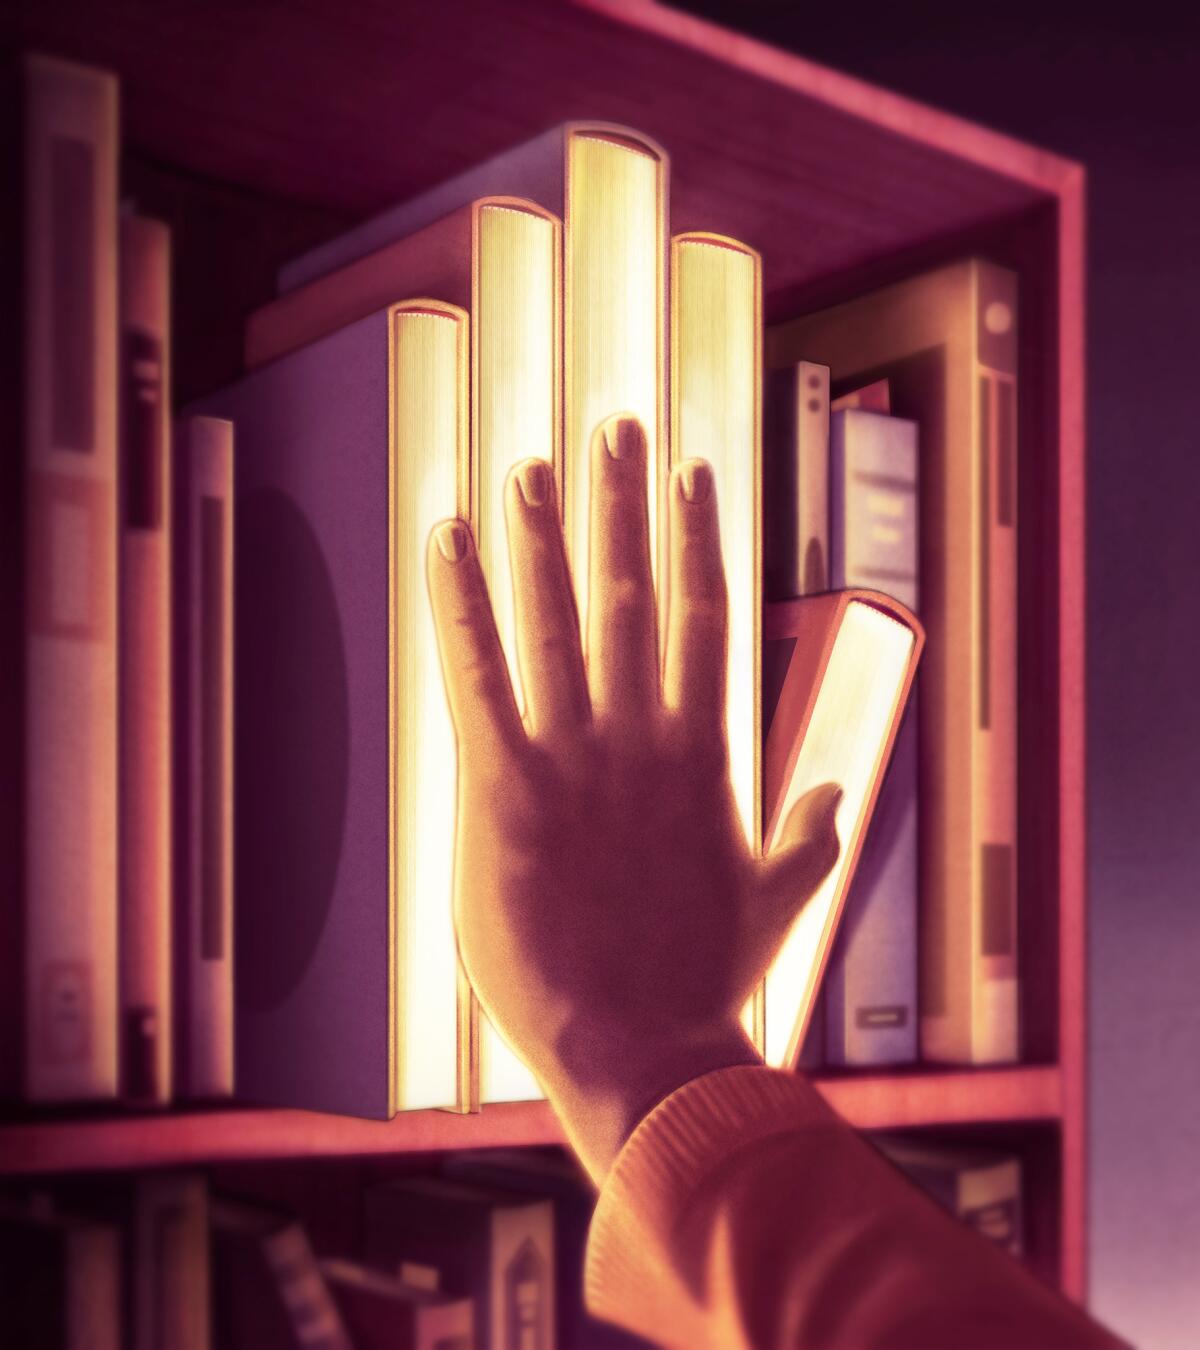 Reach out and touch a book.